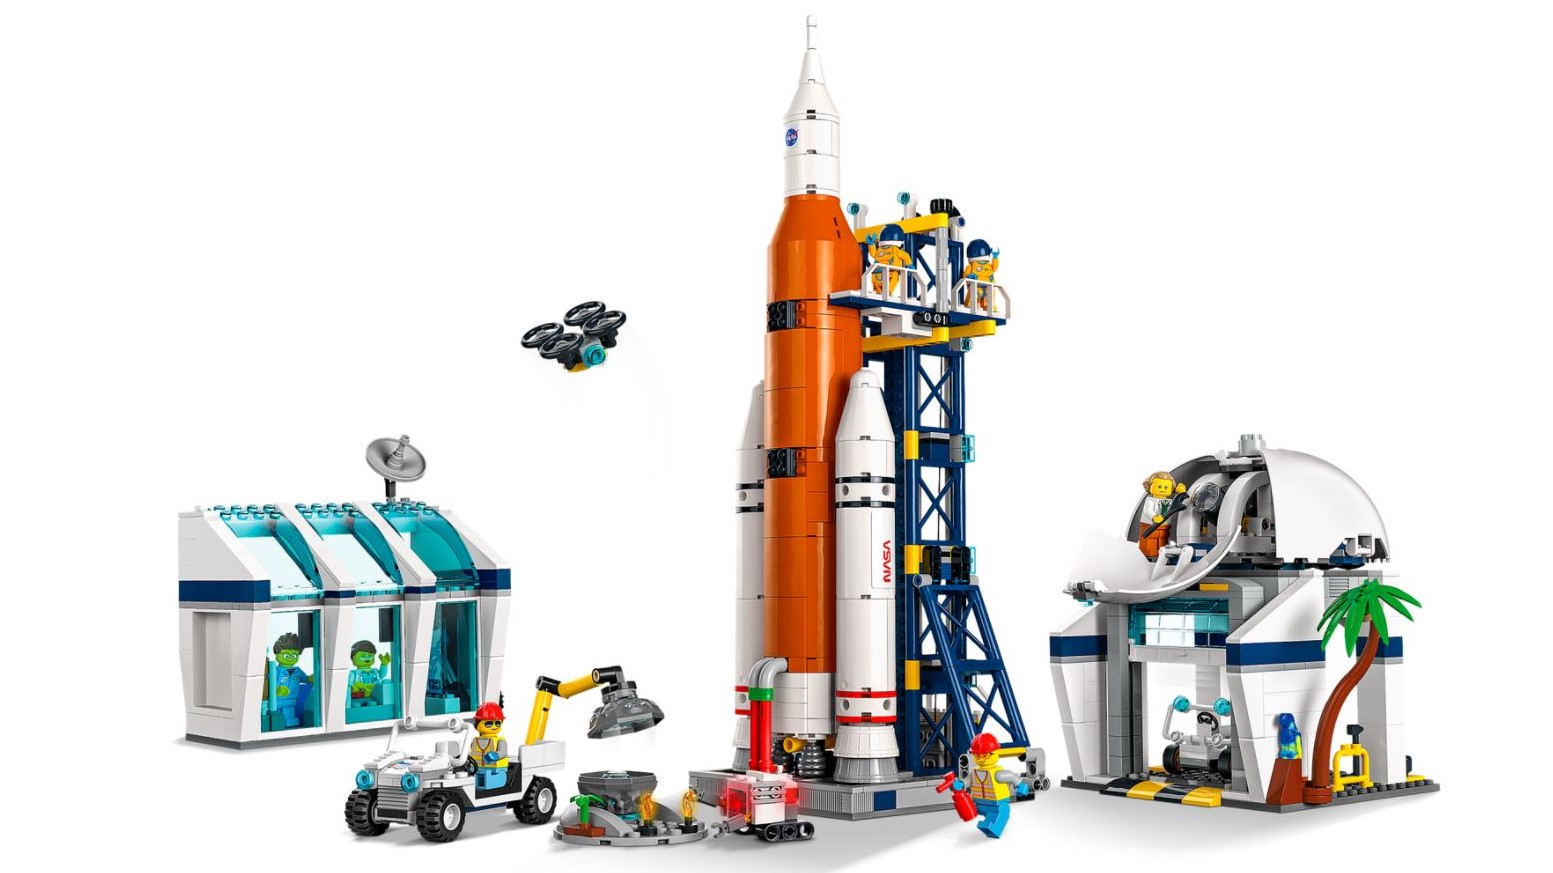 Rocket Launch Center_The LEGO Group